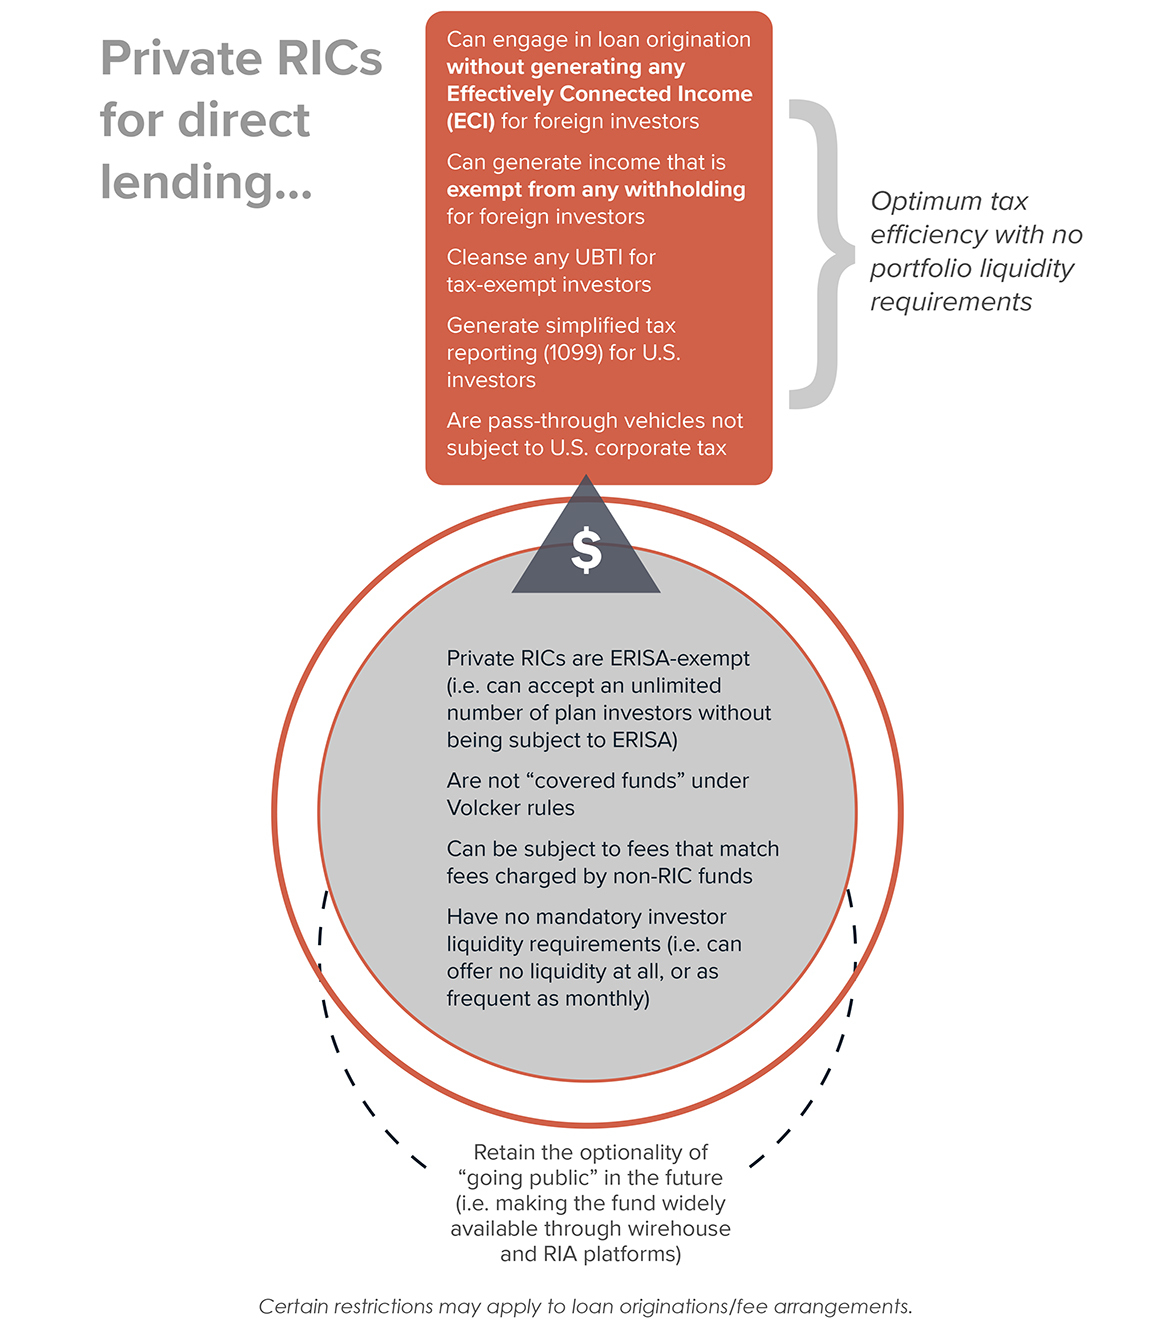 Private RICs for Direct Lending Infographic